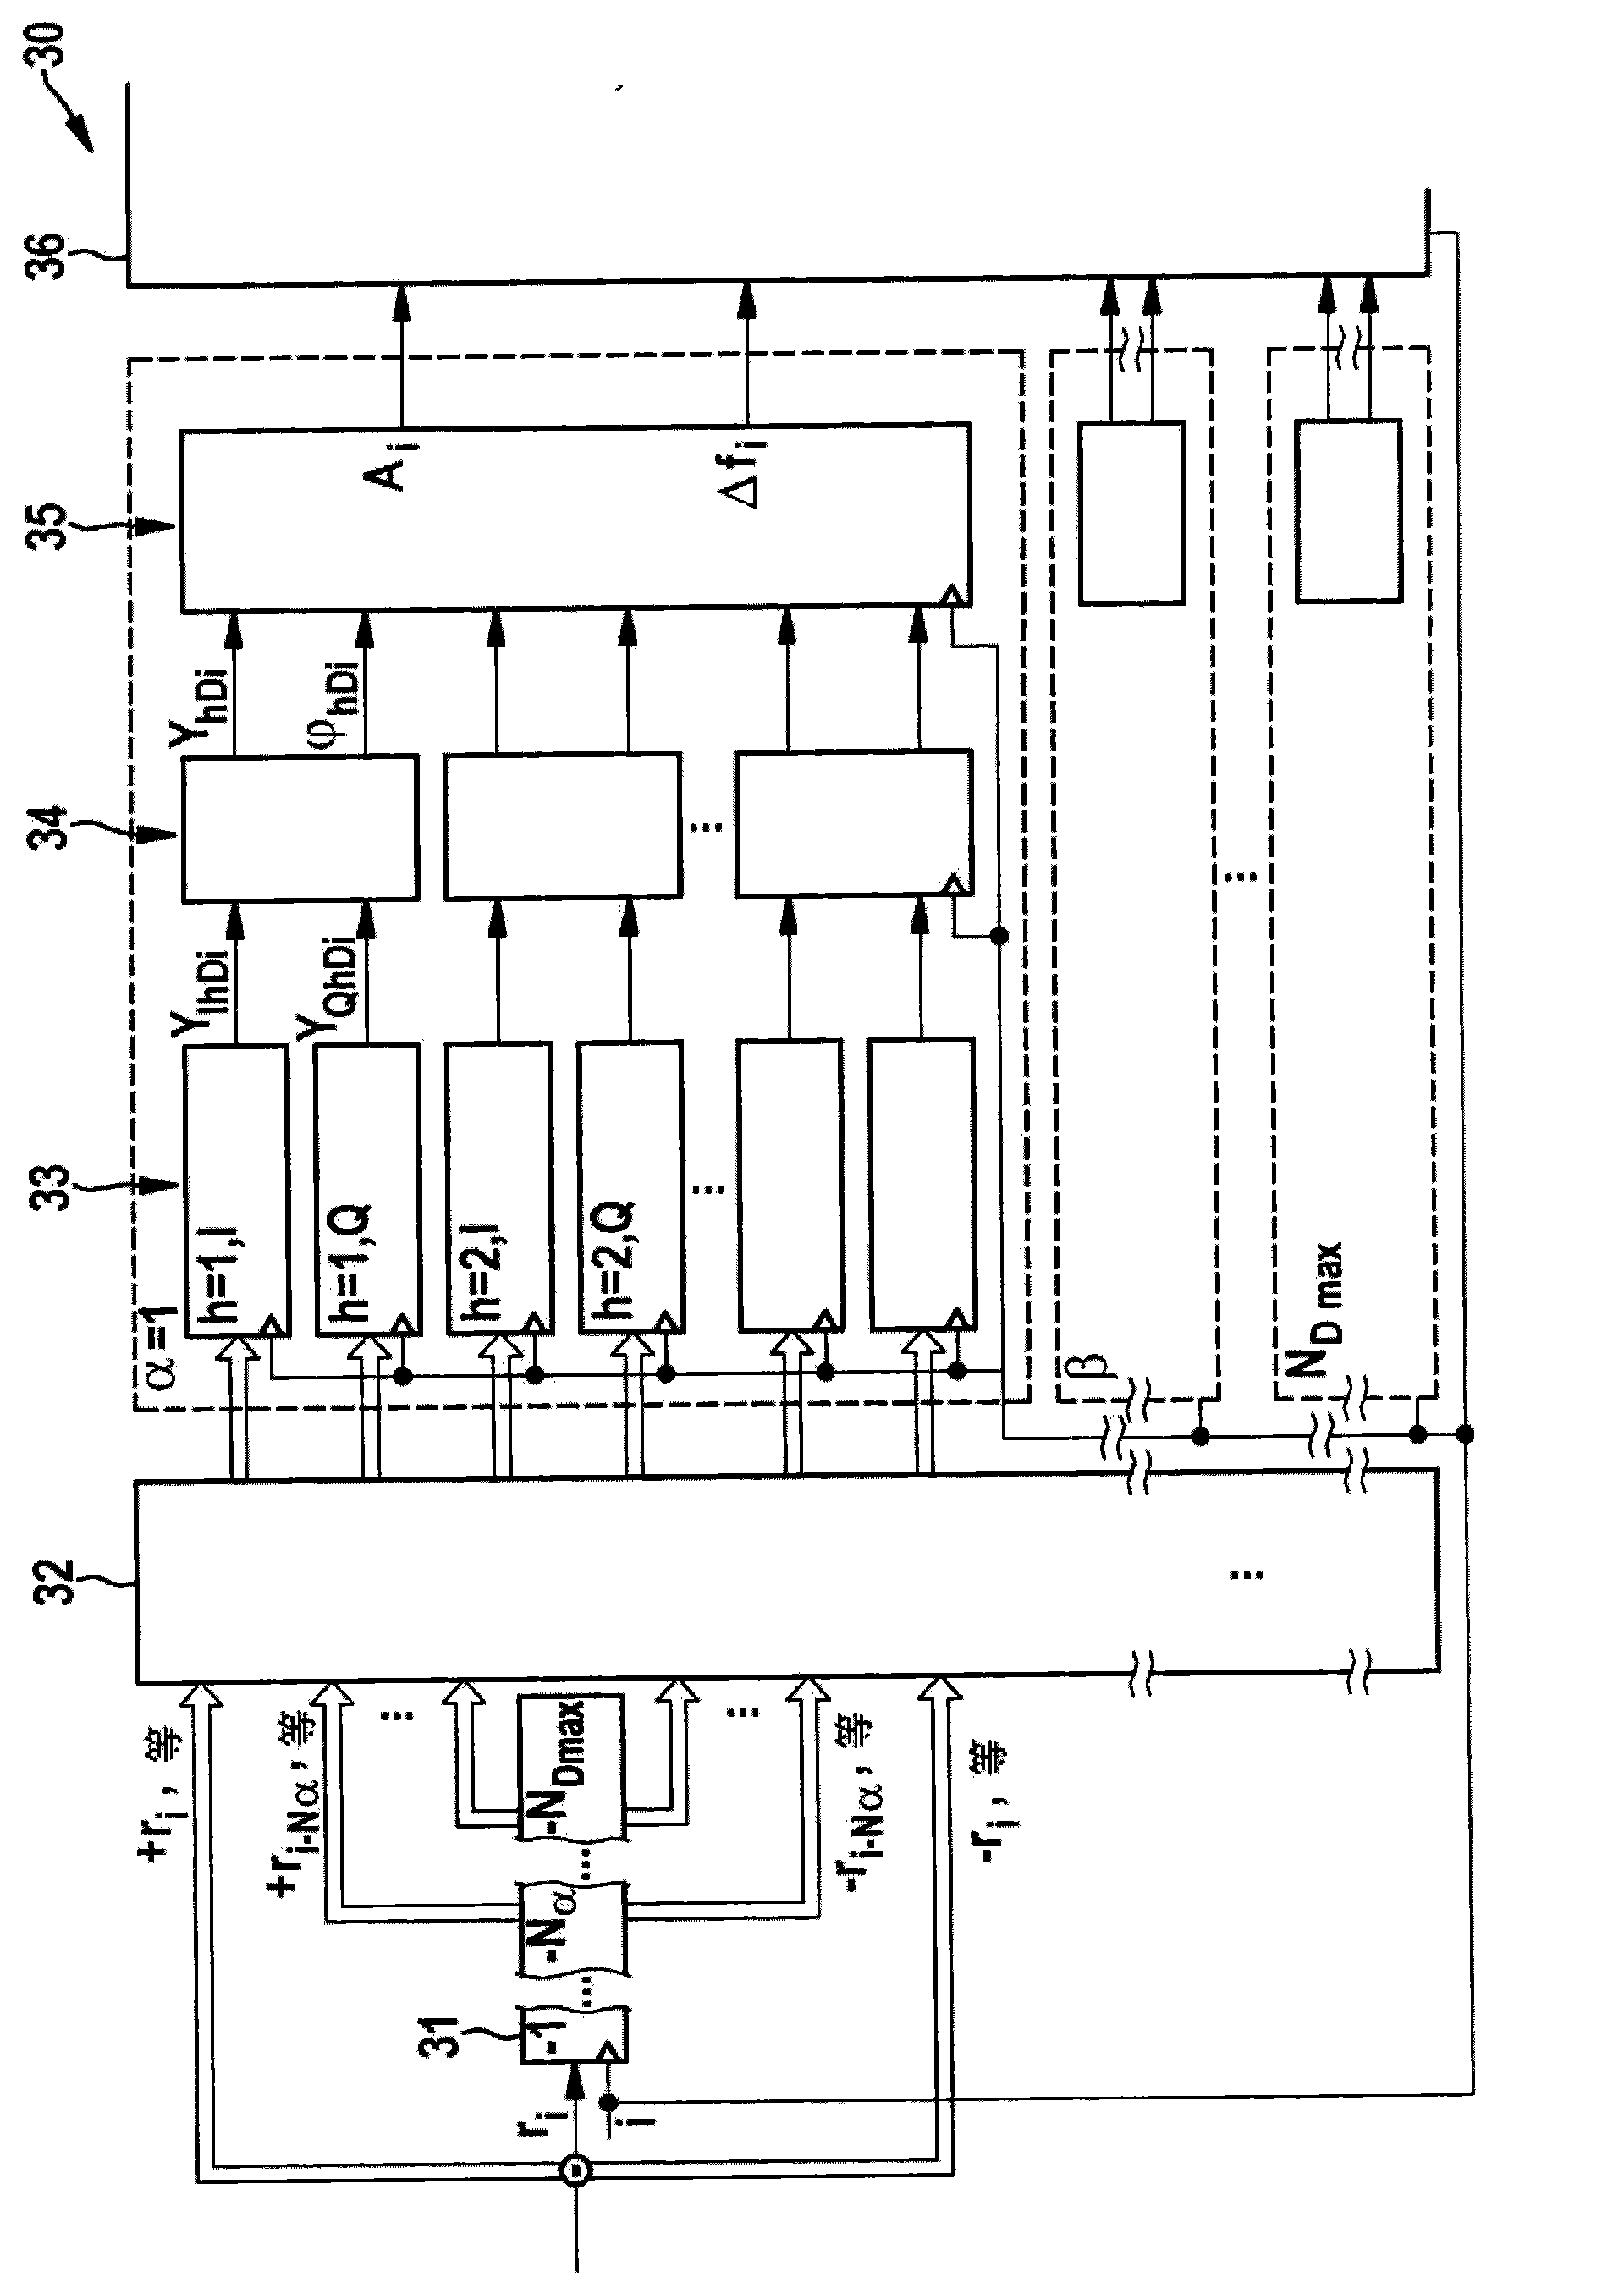 Apparatus for detecting audible signals and associated method